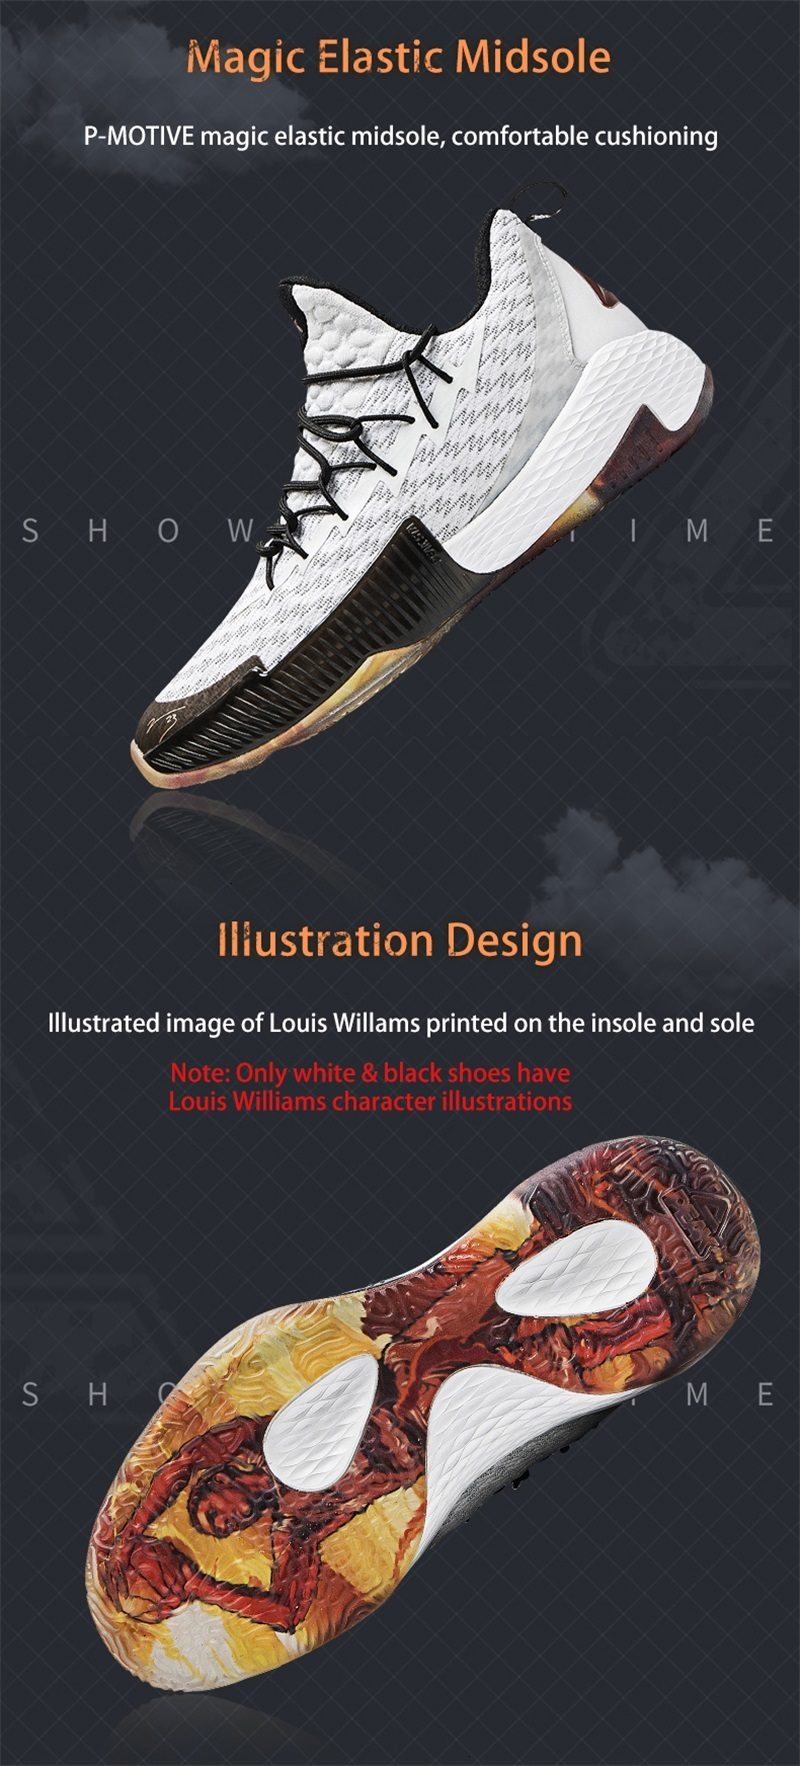 PEAK Men Basketball Shoes Lou Williams Lightning Rebound Sneakers Gym Outdoor Anti-slip Wearable Train Breathable Sports Shoes